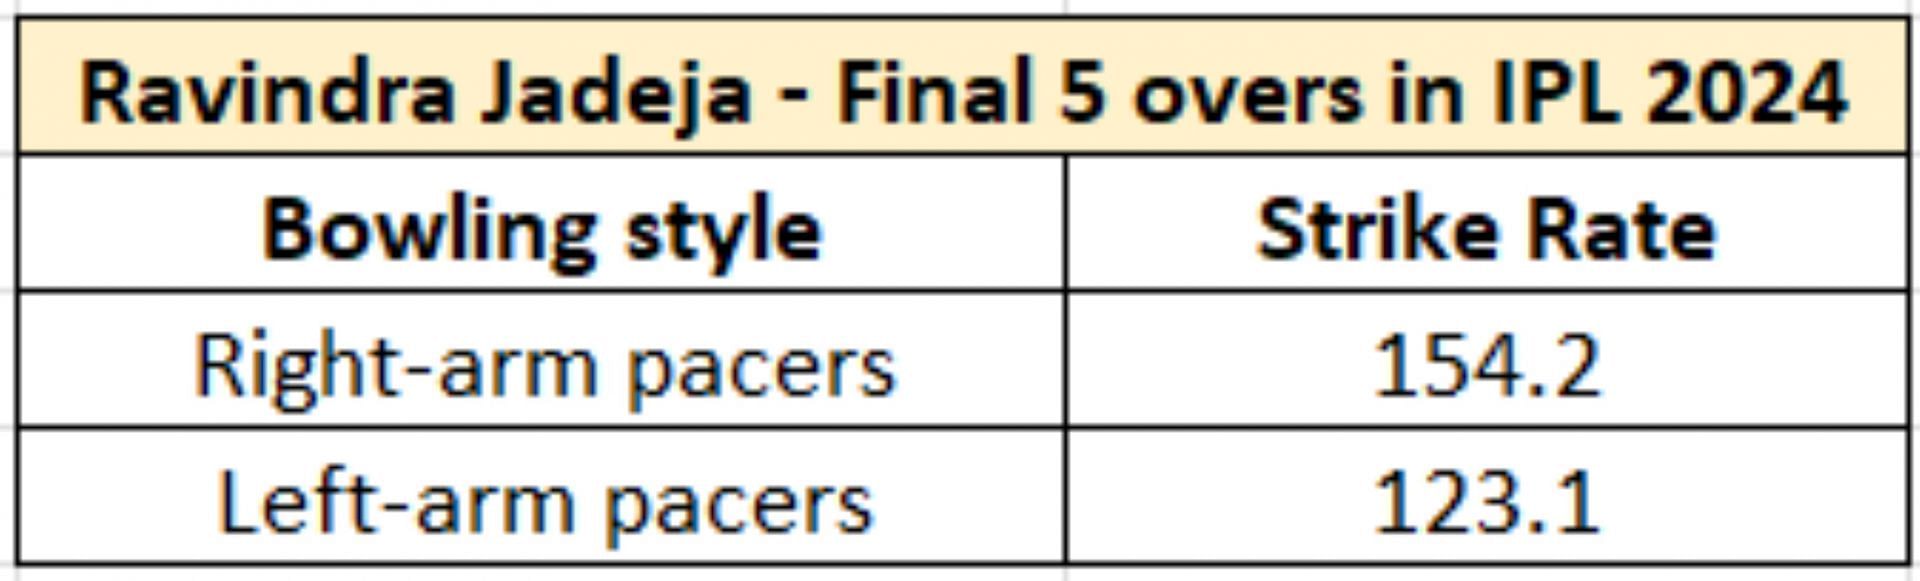 Left-armers have strangled Jadeja in the death overs this season. (Credit: Cricinfo Cricmetric)